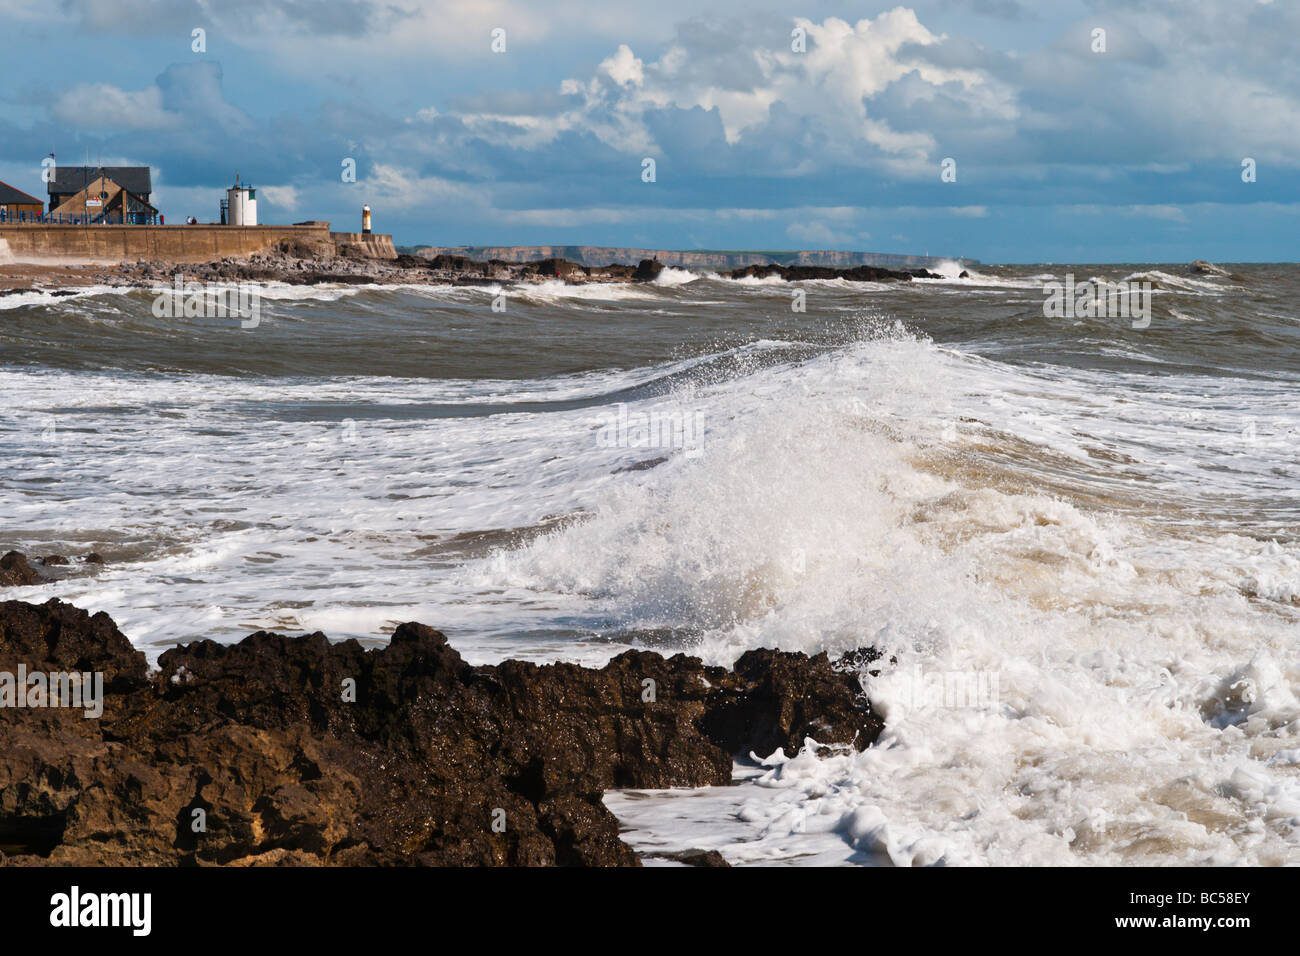 Waves breaking on the shore at Porthcawl, South Wales. Stock Photo